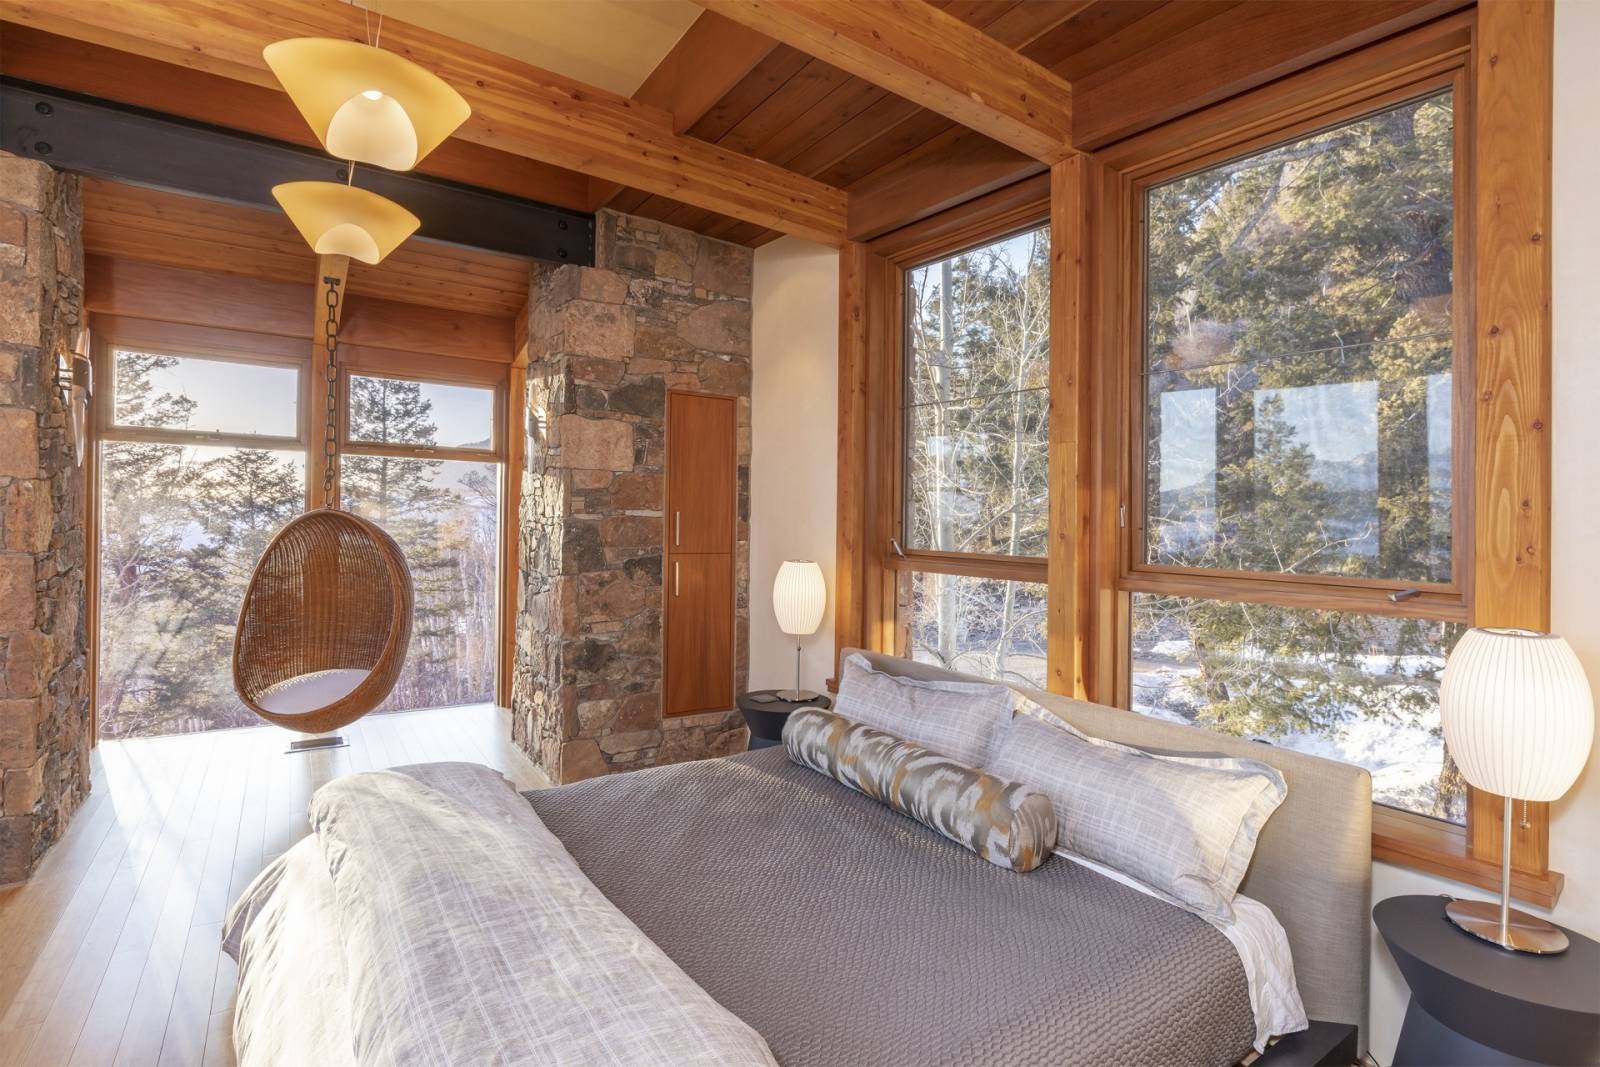 Telluride Vacation Rentals, PaGomo* - If you need some privacy or darkness just flip a switch and the shades will automatically close to provide you ultimate privacy.